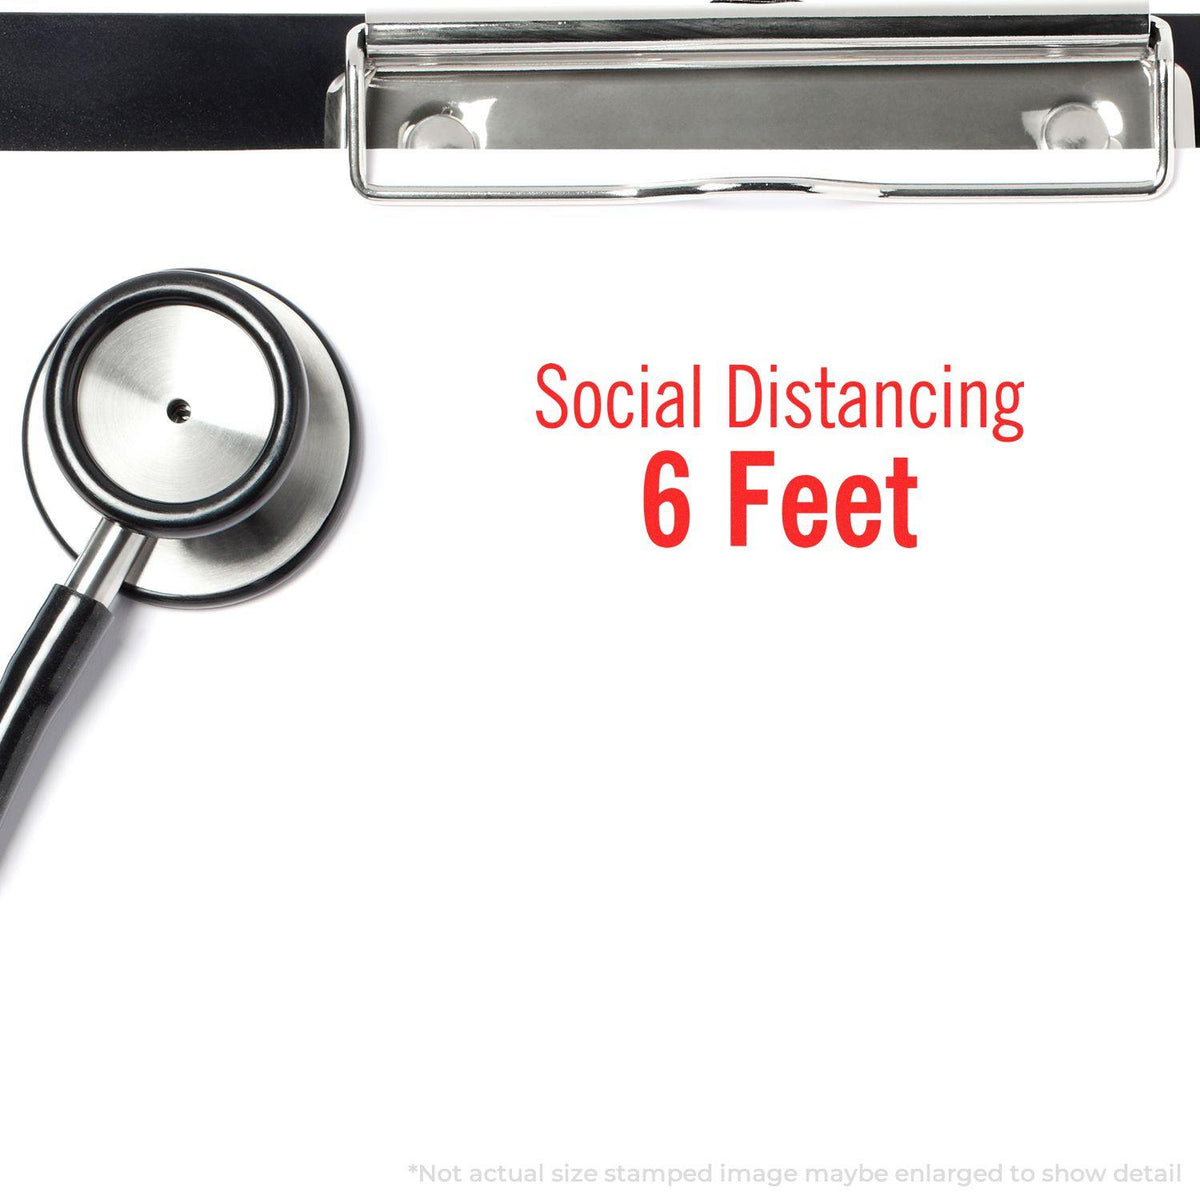 Social Distancing 6 Feet Rubber Stamp In Use Photo